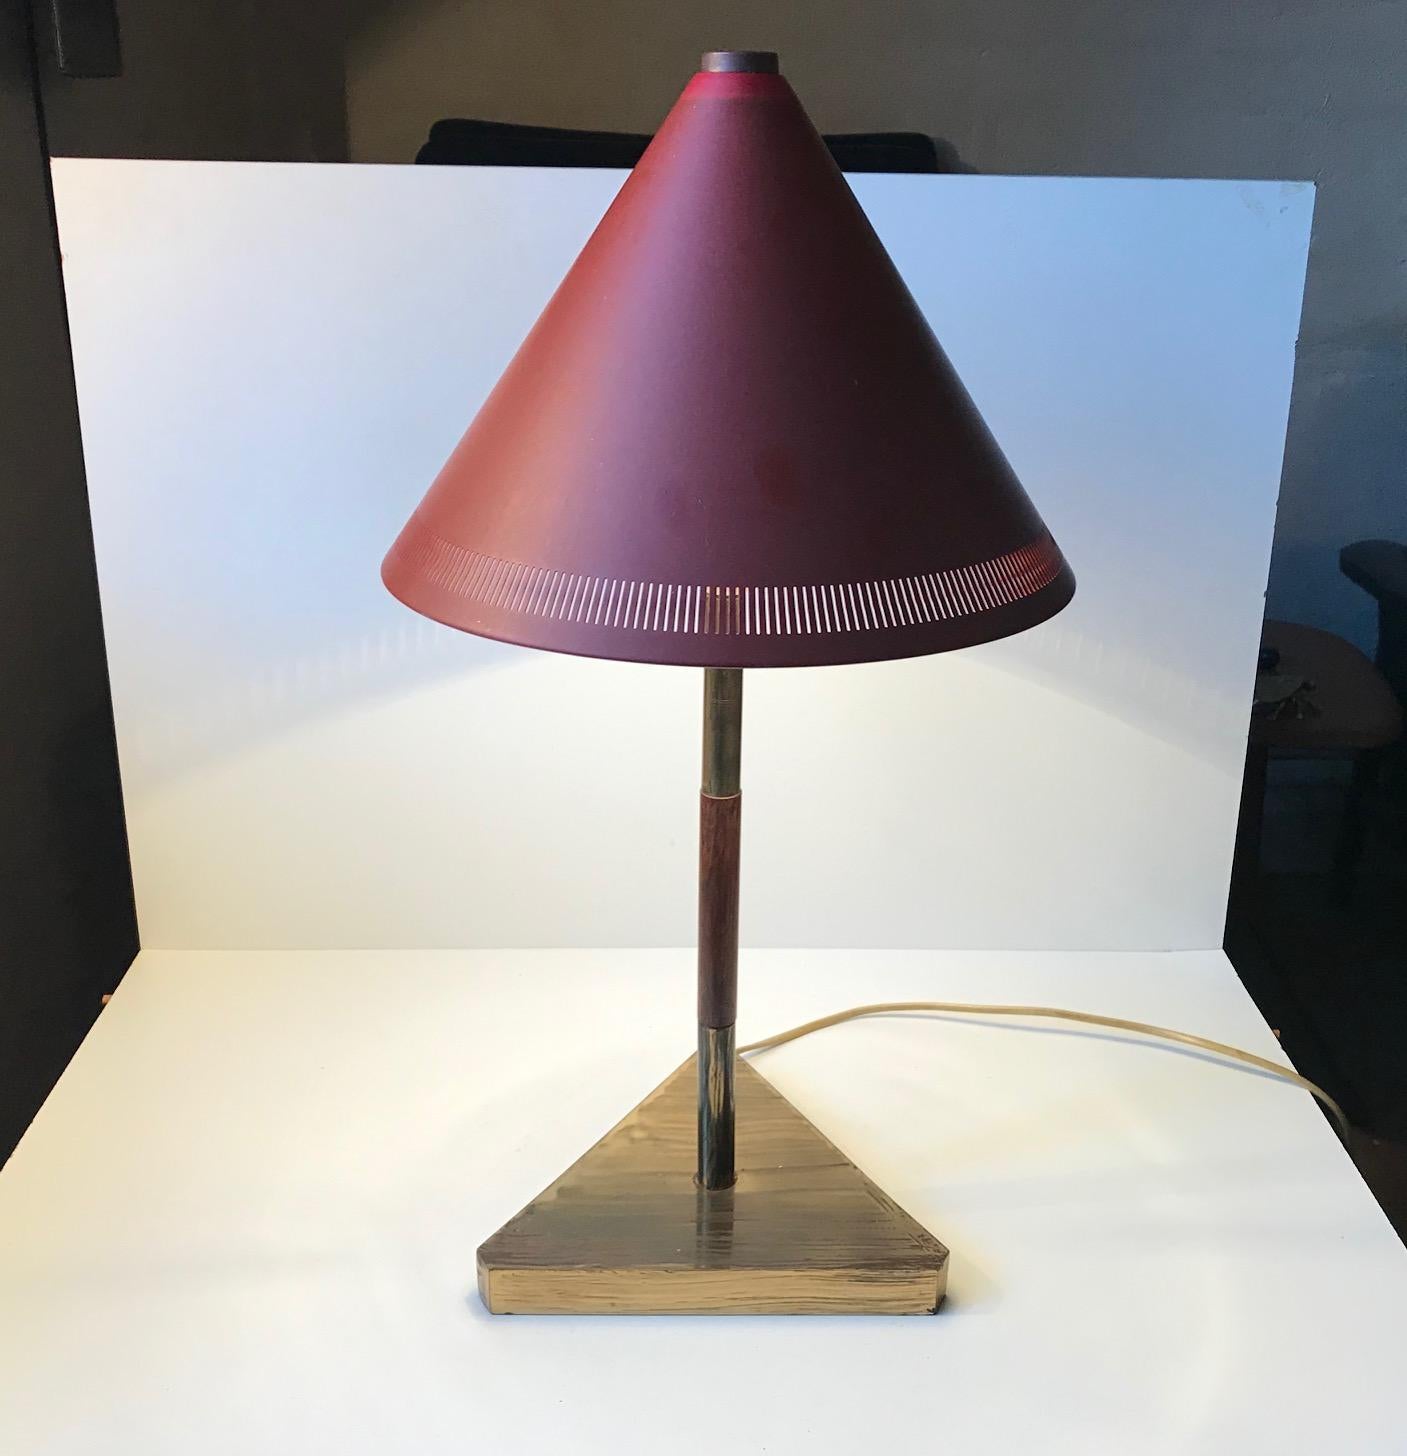 This Danish table lamp has a conical-shaped shade and a triangular brass base. It was manufactured by Lyfa in Denmark during the 1960s. The piece features a brass base and stem and a centerpiece in teak. The perforated clay-red shade is made from